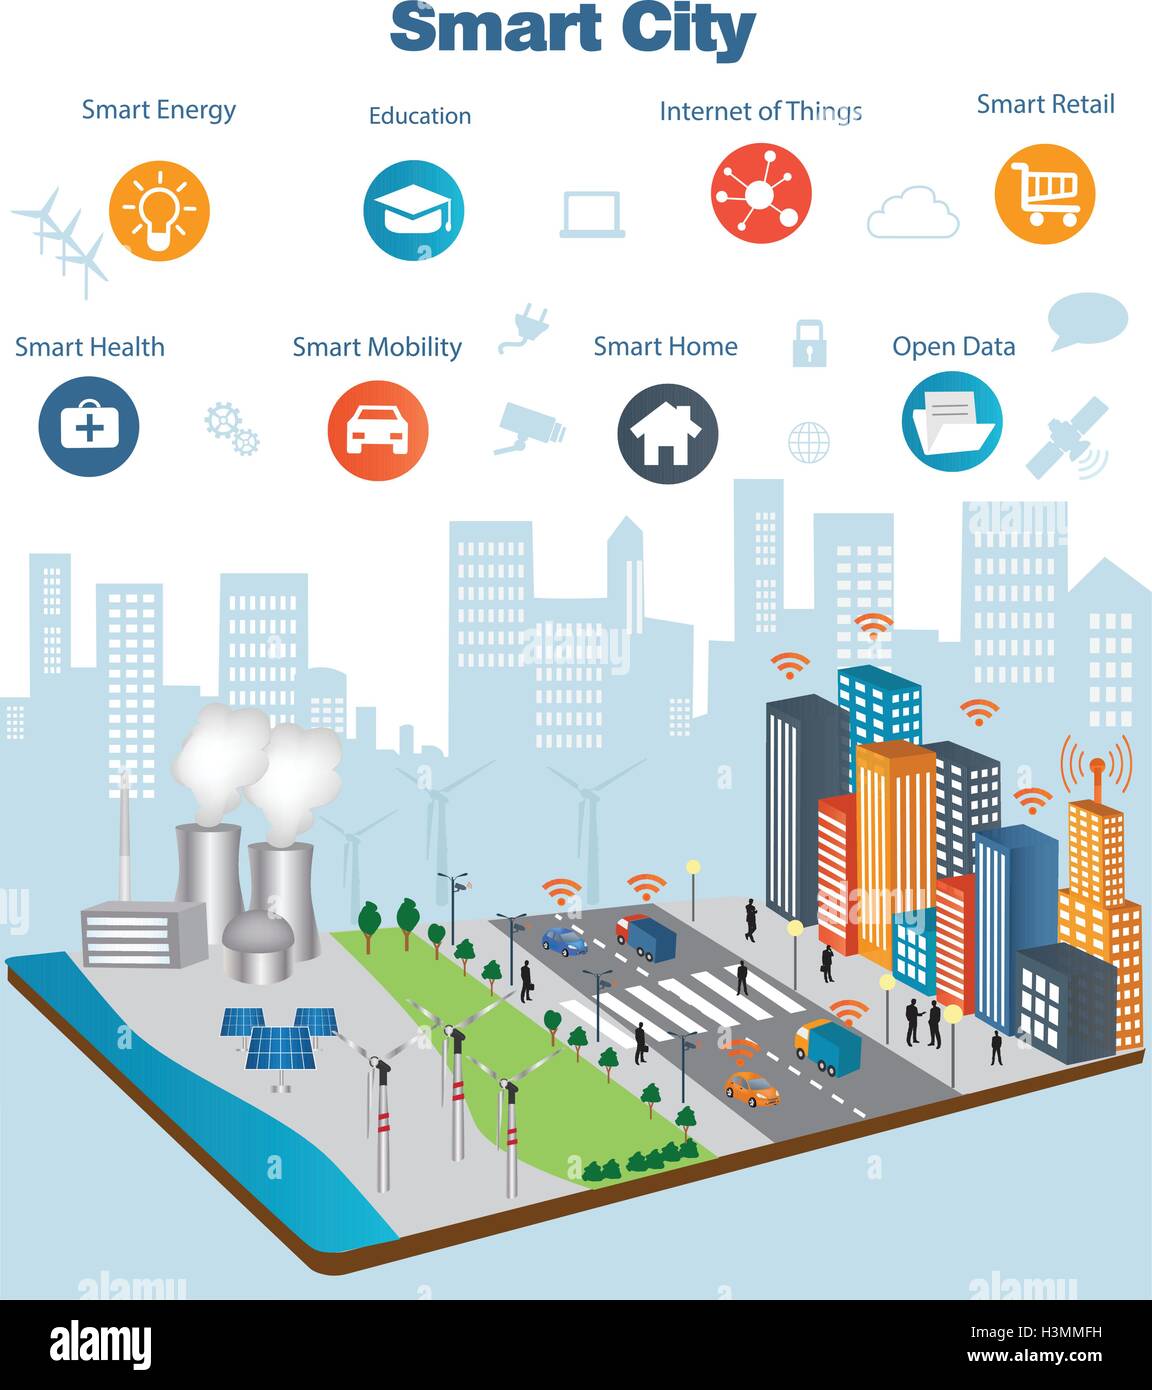 Smart city concept with different icon and elements. Modern city design with future technology for living. Stock Vector